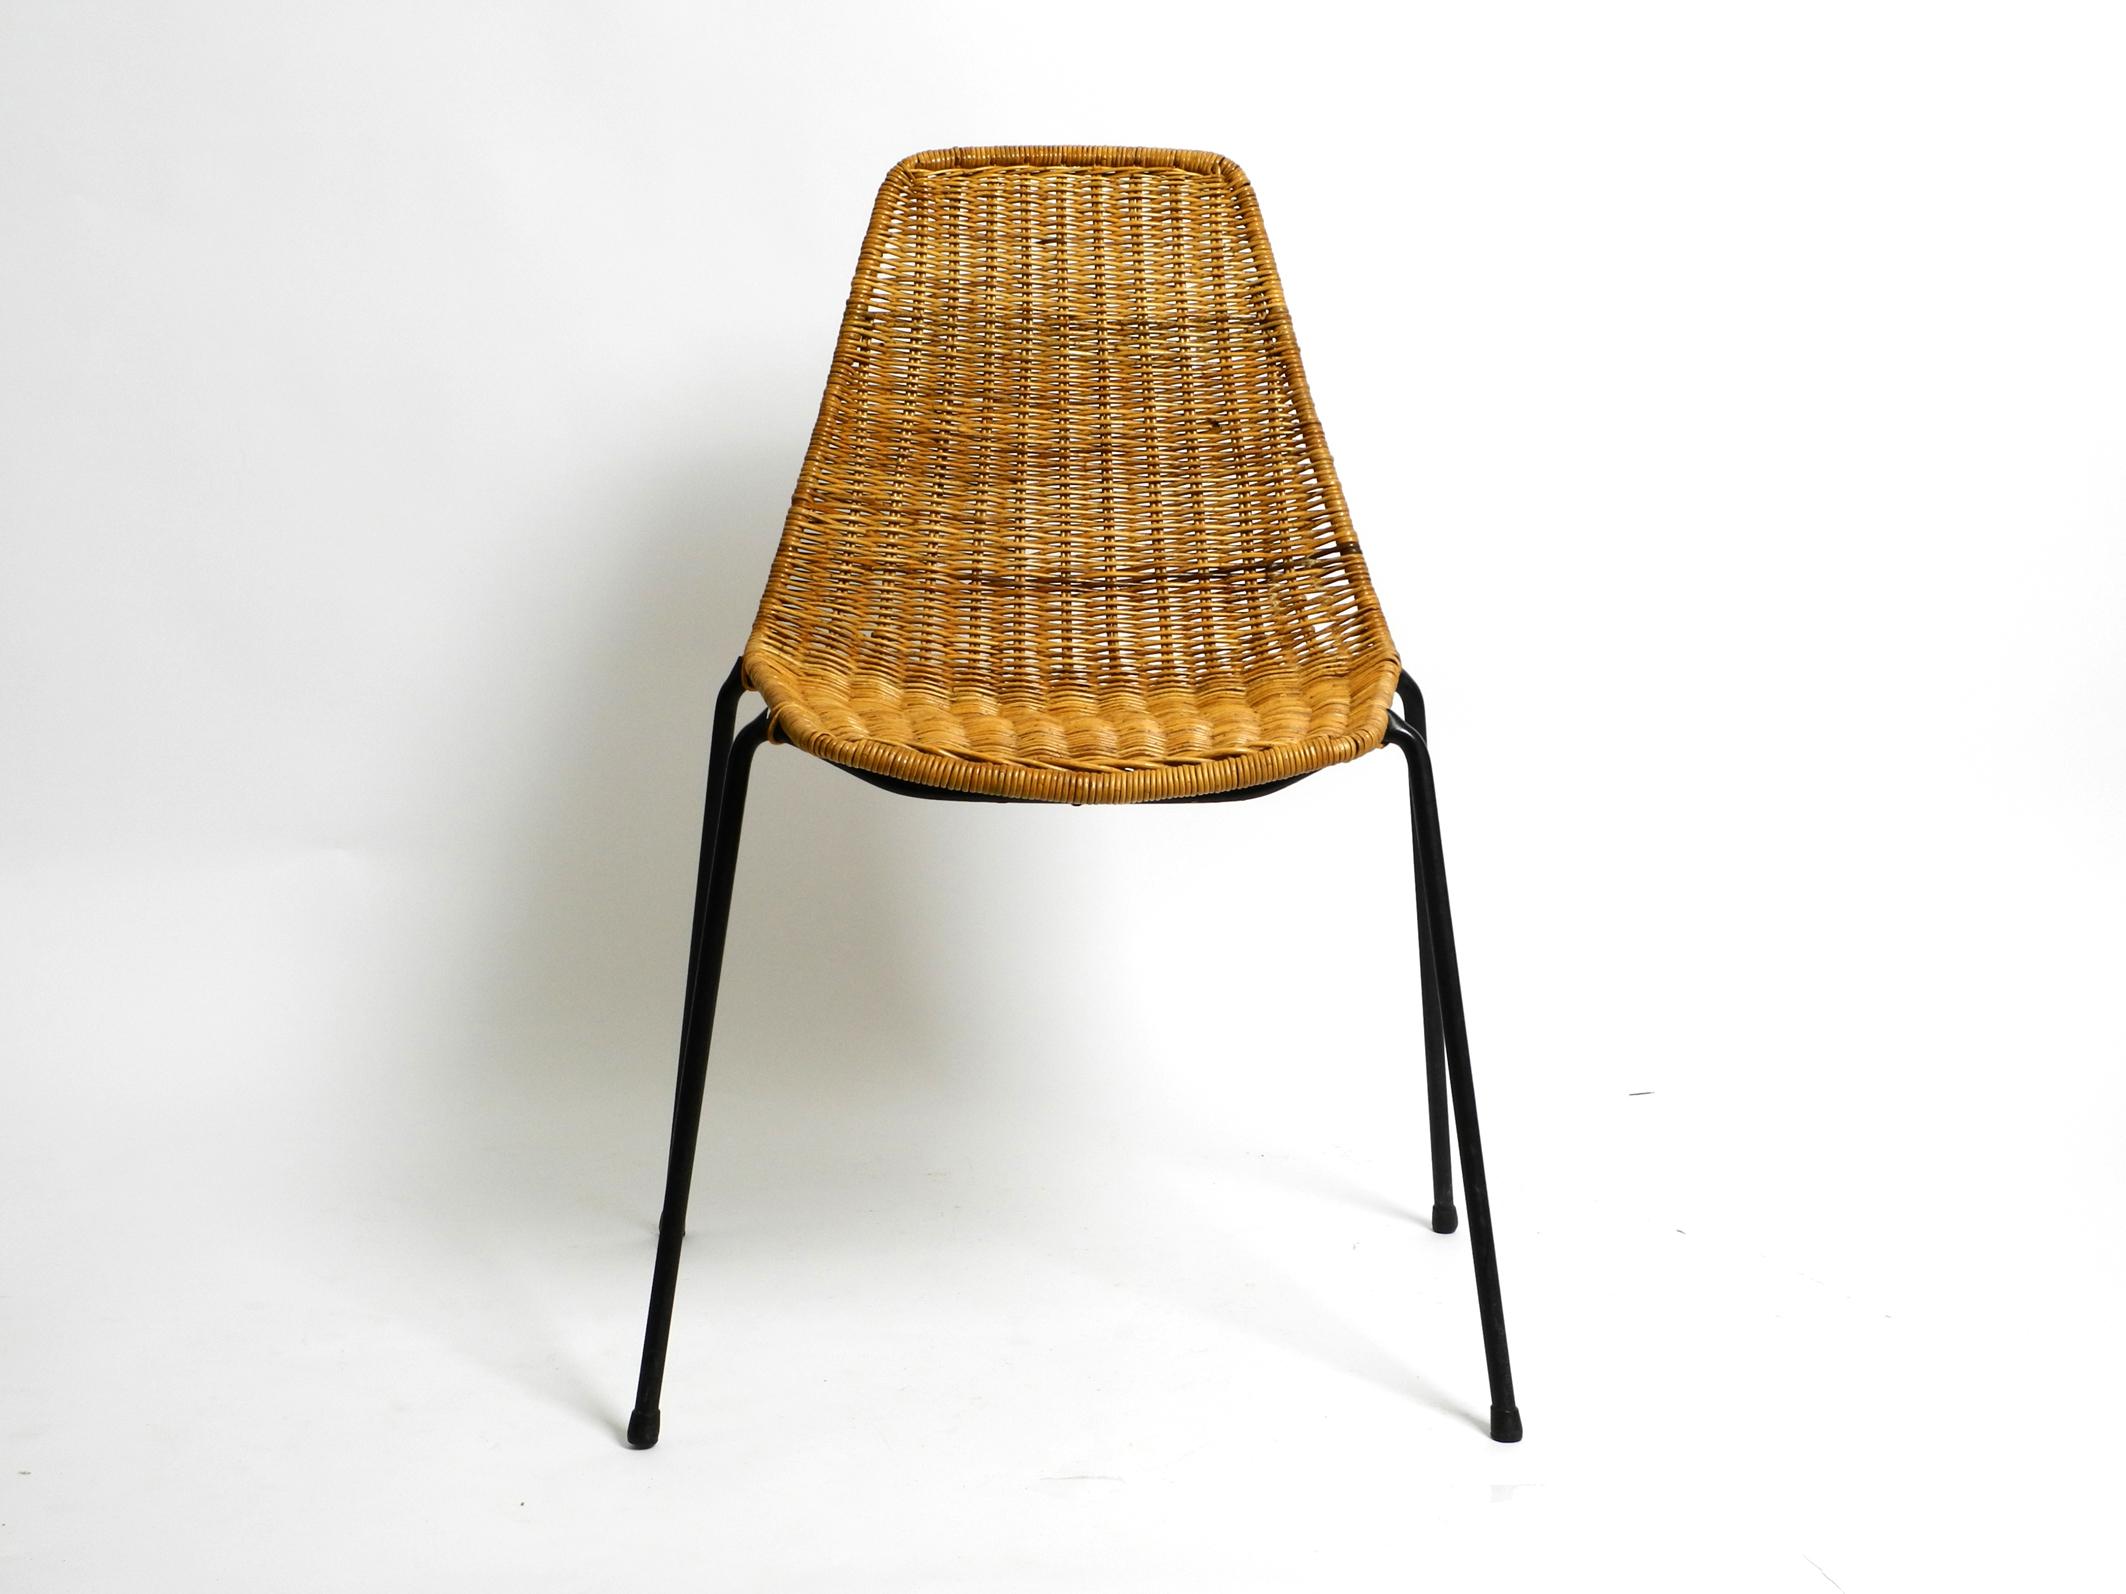 Original Italian Mid-Century Modern Gian Franco Legler Basket Chair in very good vintage condition.
Very well preserved and without damage.
The rattan is without breaks or holes.
Metal frame is without rust and still with original black paint and